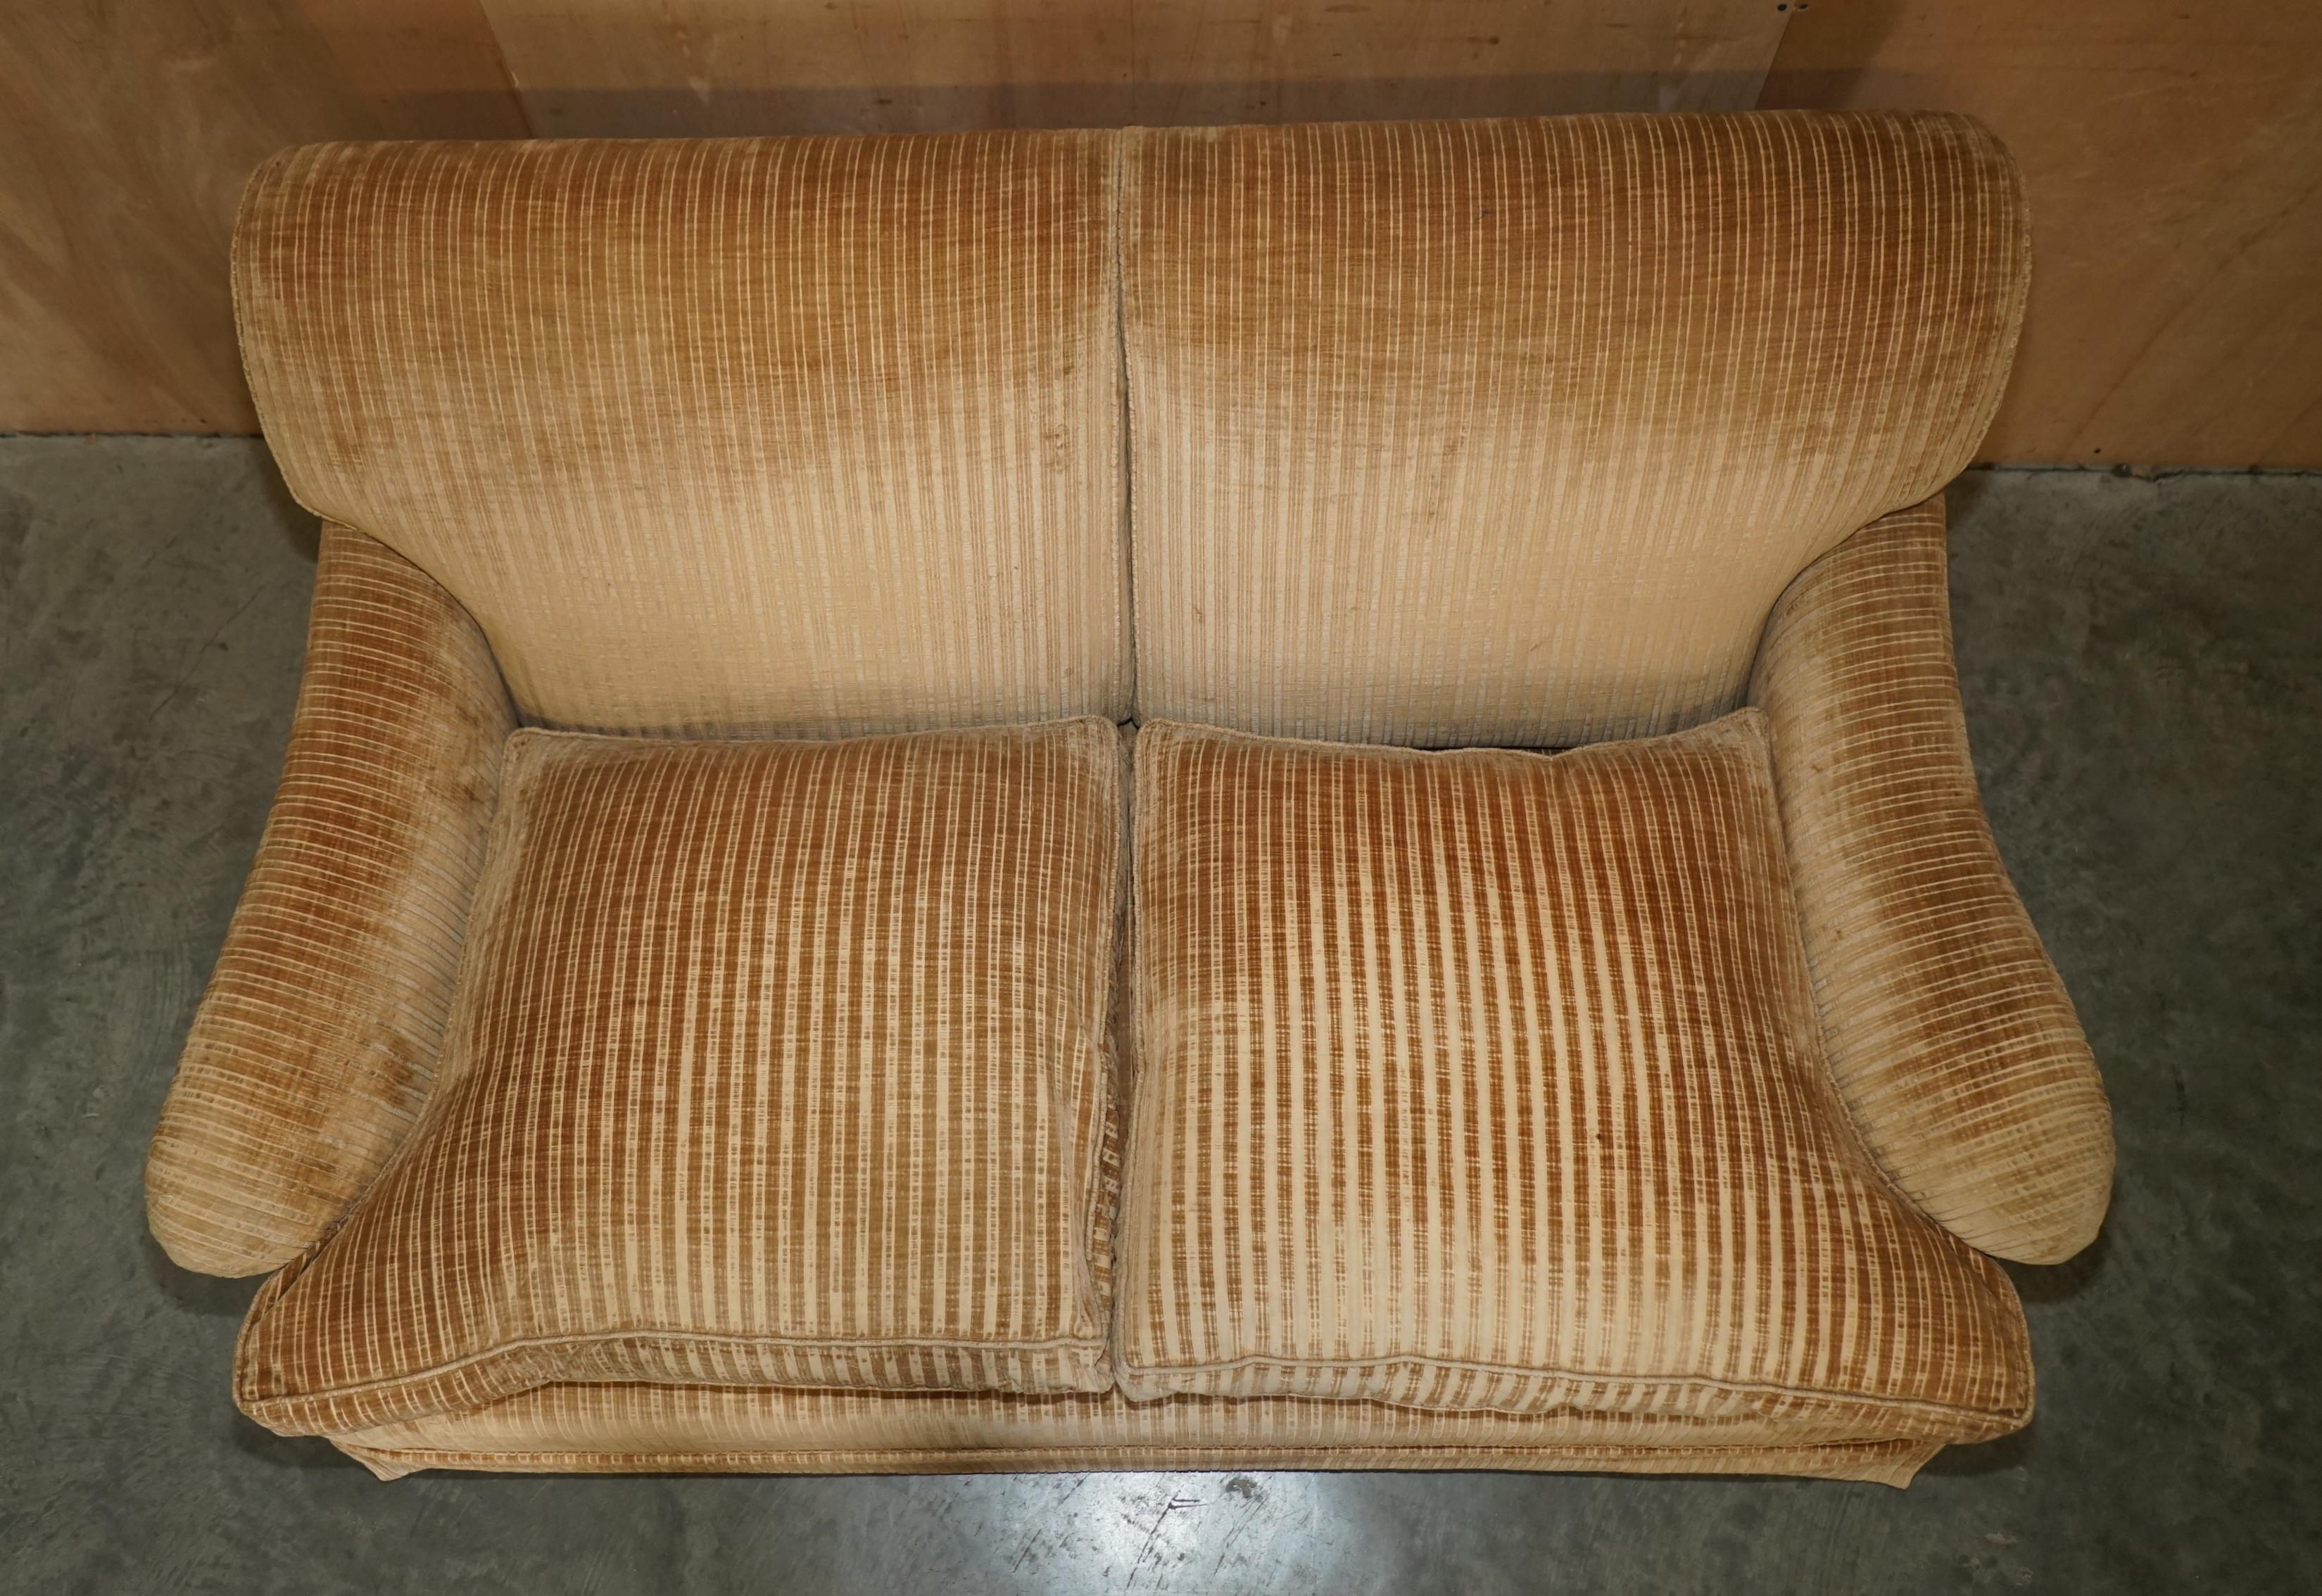 Hand-Crafted LOVELY HOWARD & SON'S / CHAIRS LTD TWO SEAT SOFA FEATHER FILLED SEAT CUSHIONs For Sale